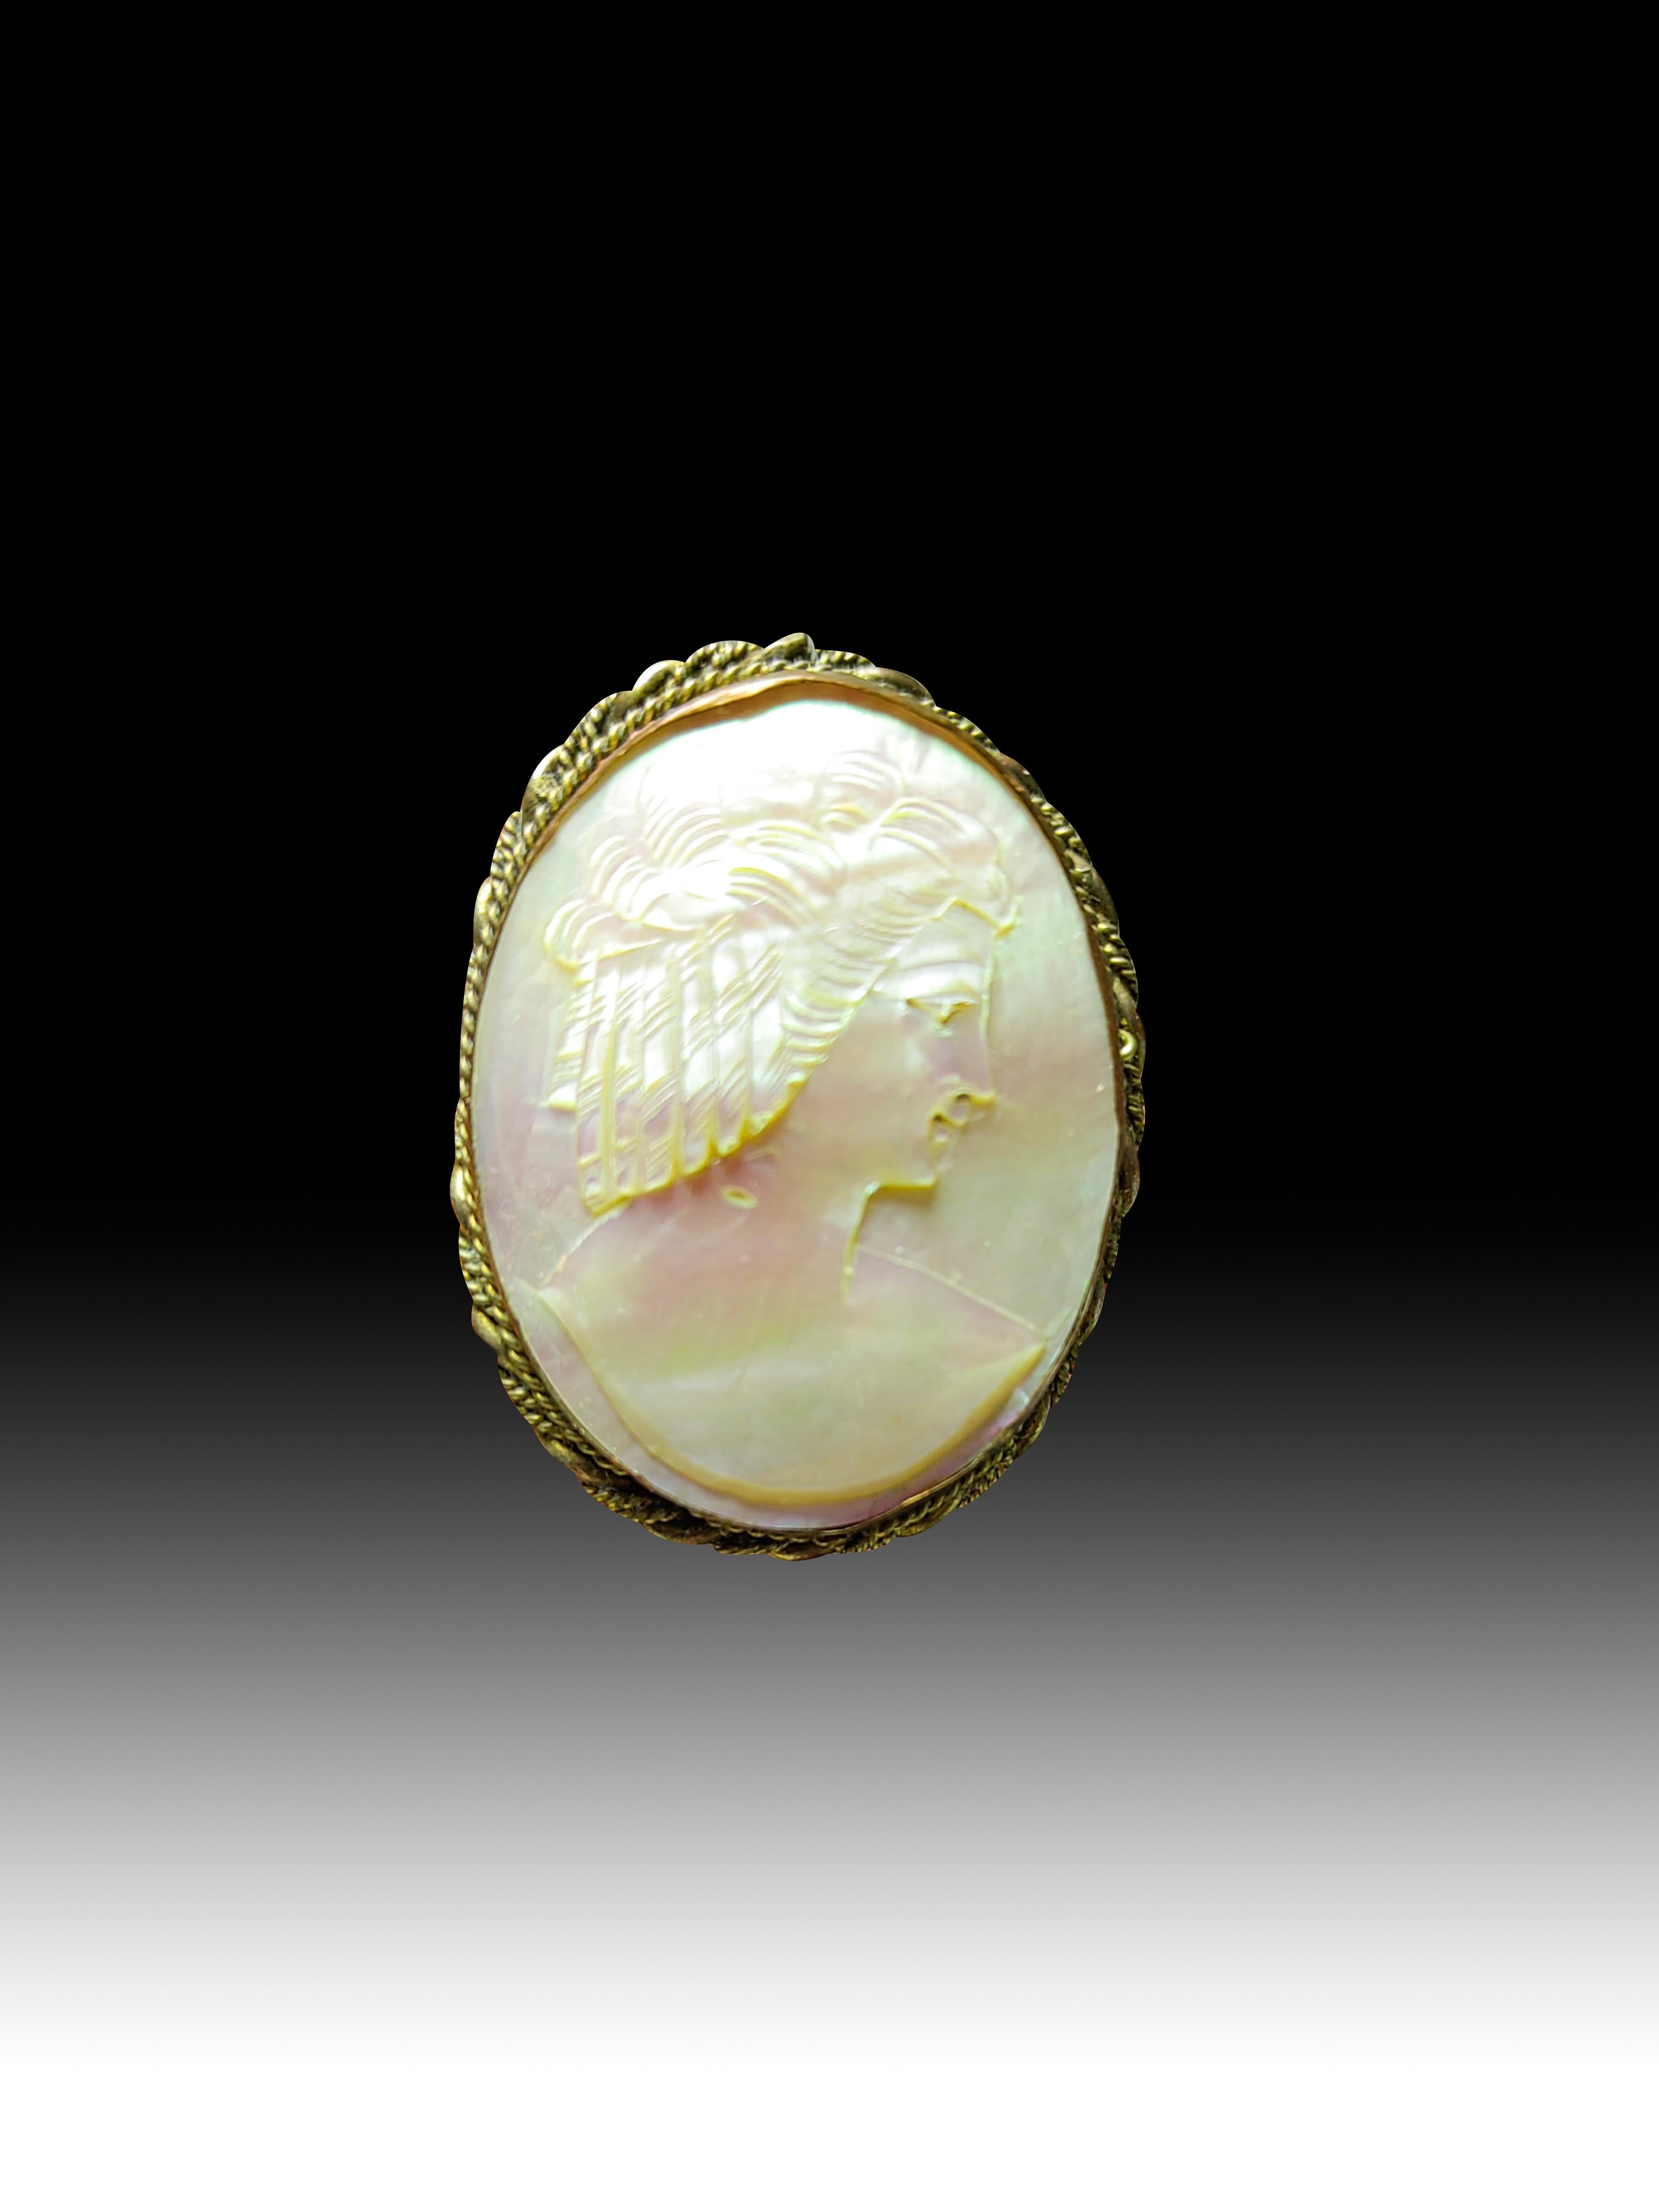 1920s Cameo
Elegant cameo from the 1920s carved in a shell and decorated with gilded brass.Dimensions:4x3x0.5 cm